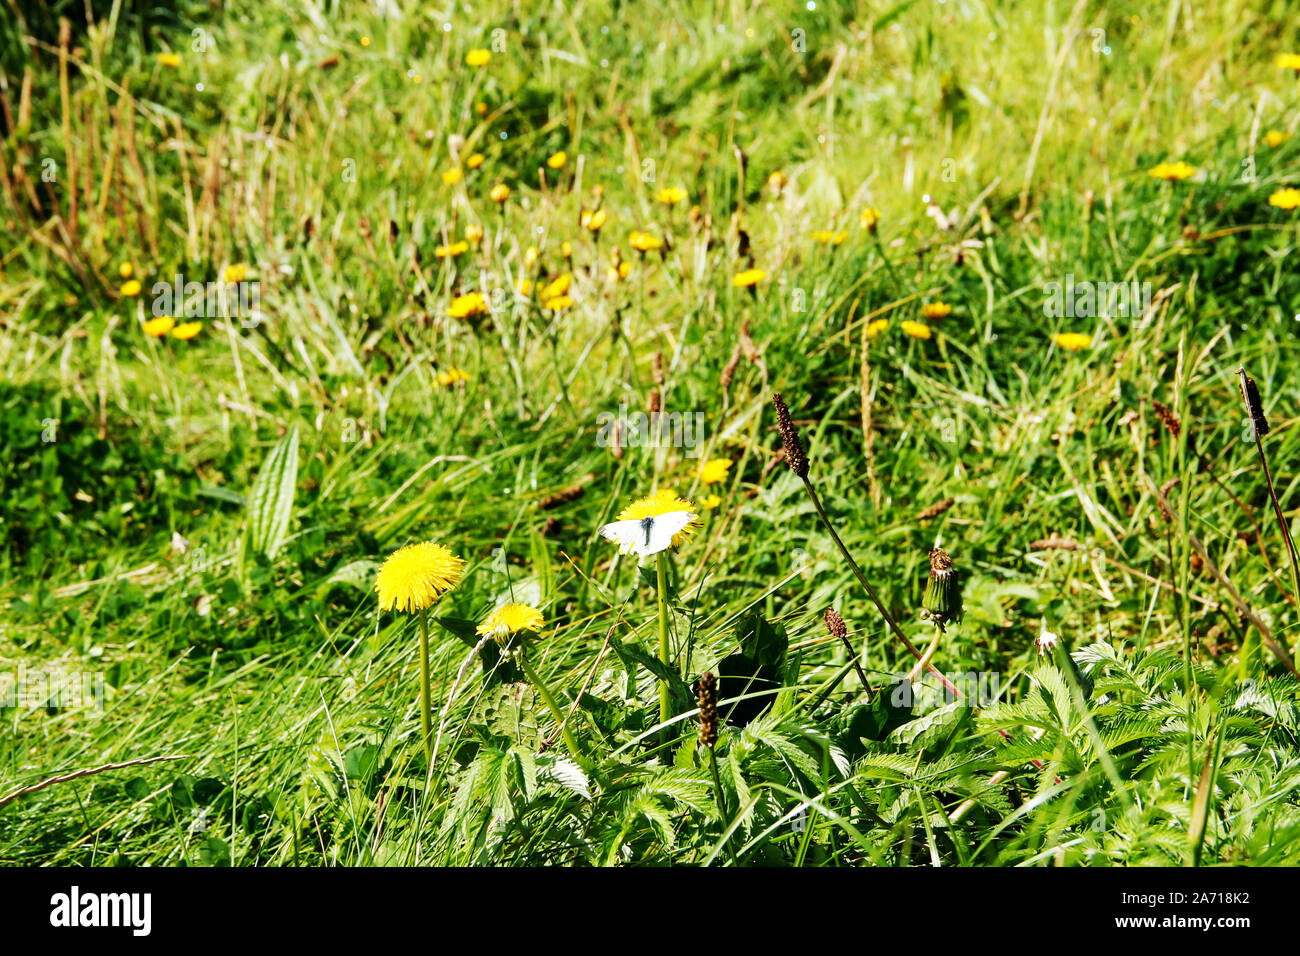 View of a meadow with a butterfly, whiting, on a dandelion Stock Photo